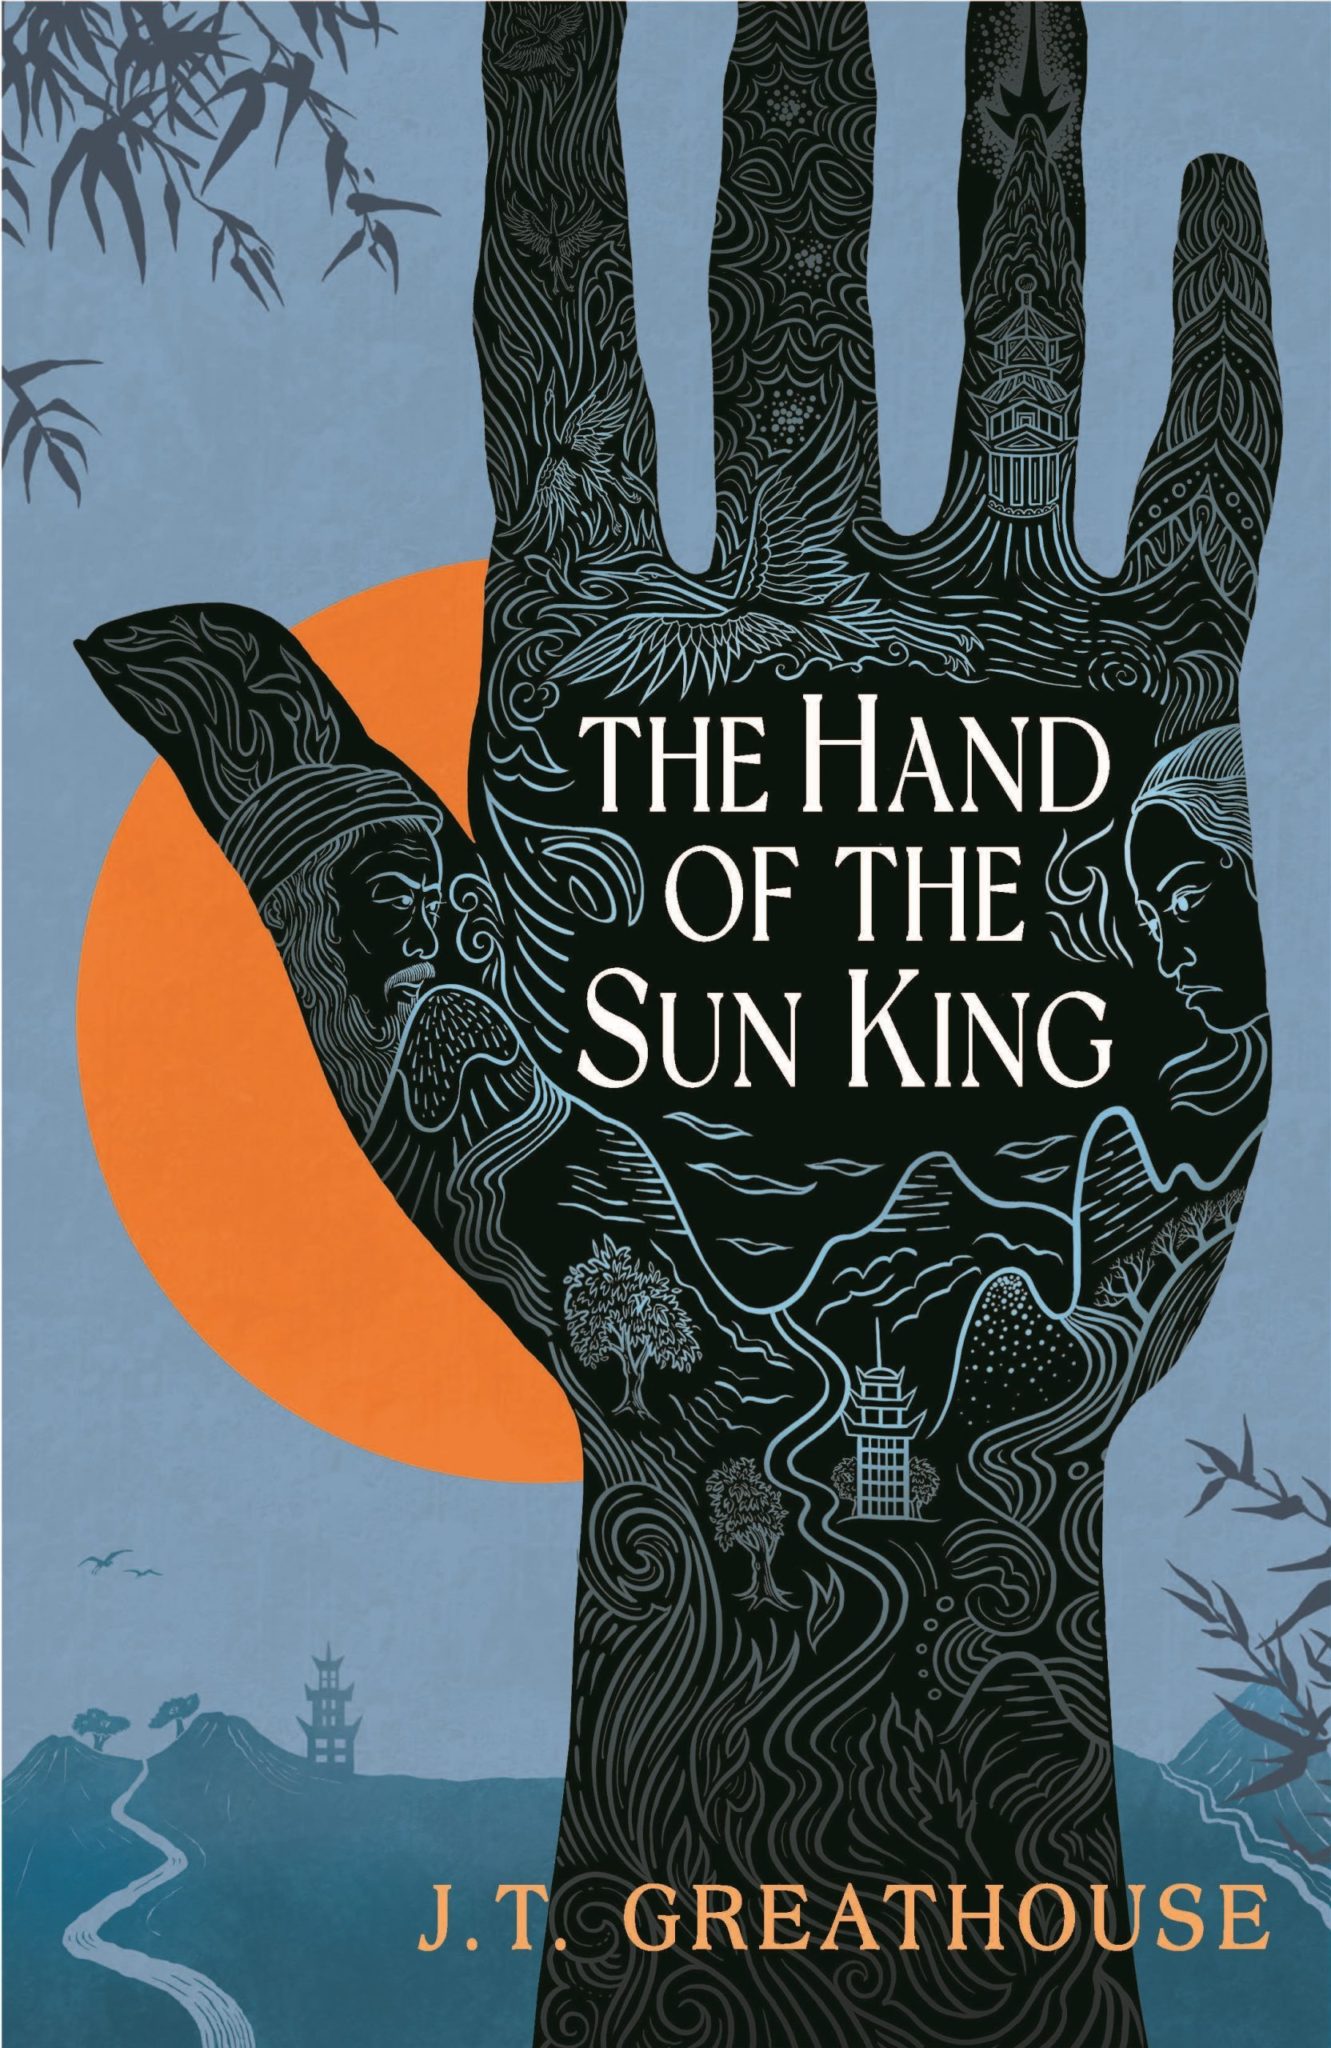 the hand of the sun king by jt greathouse